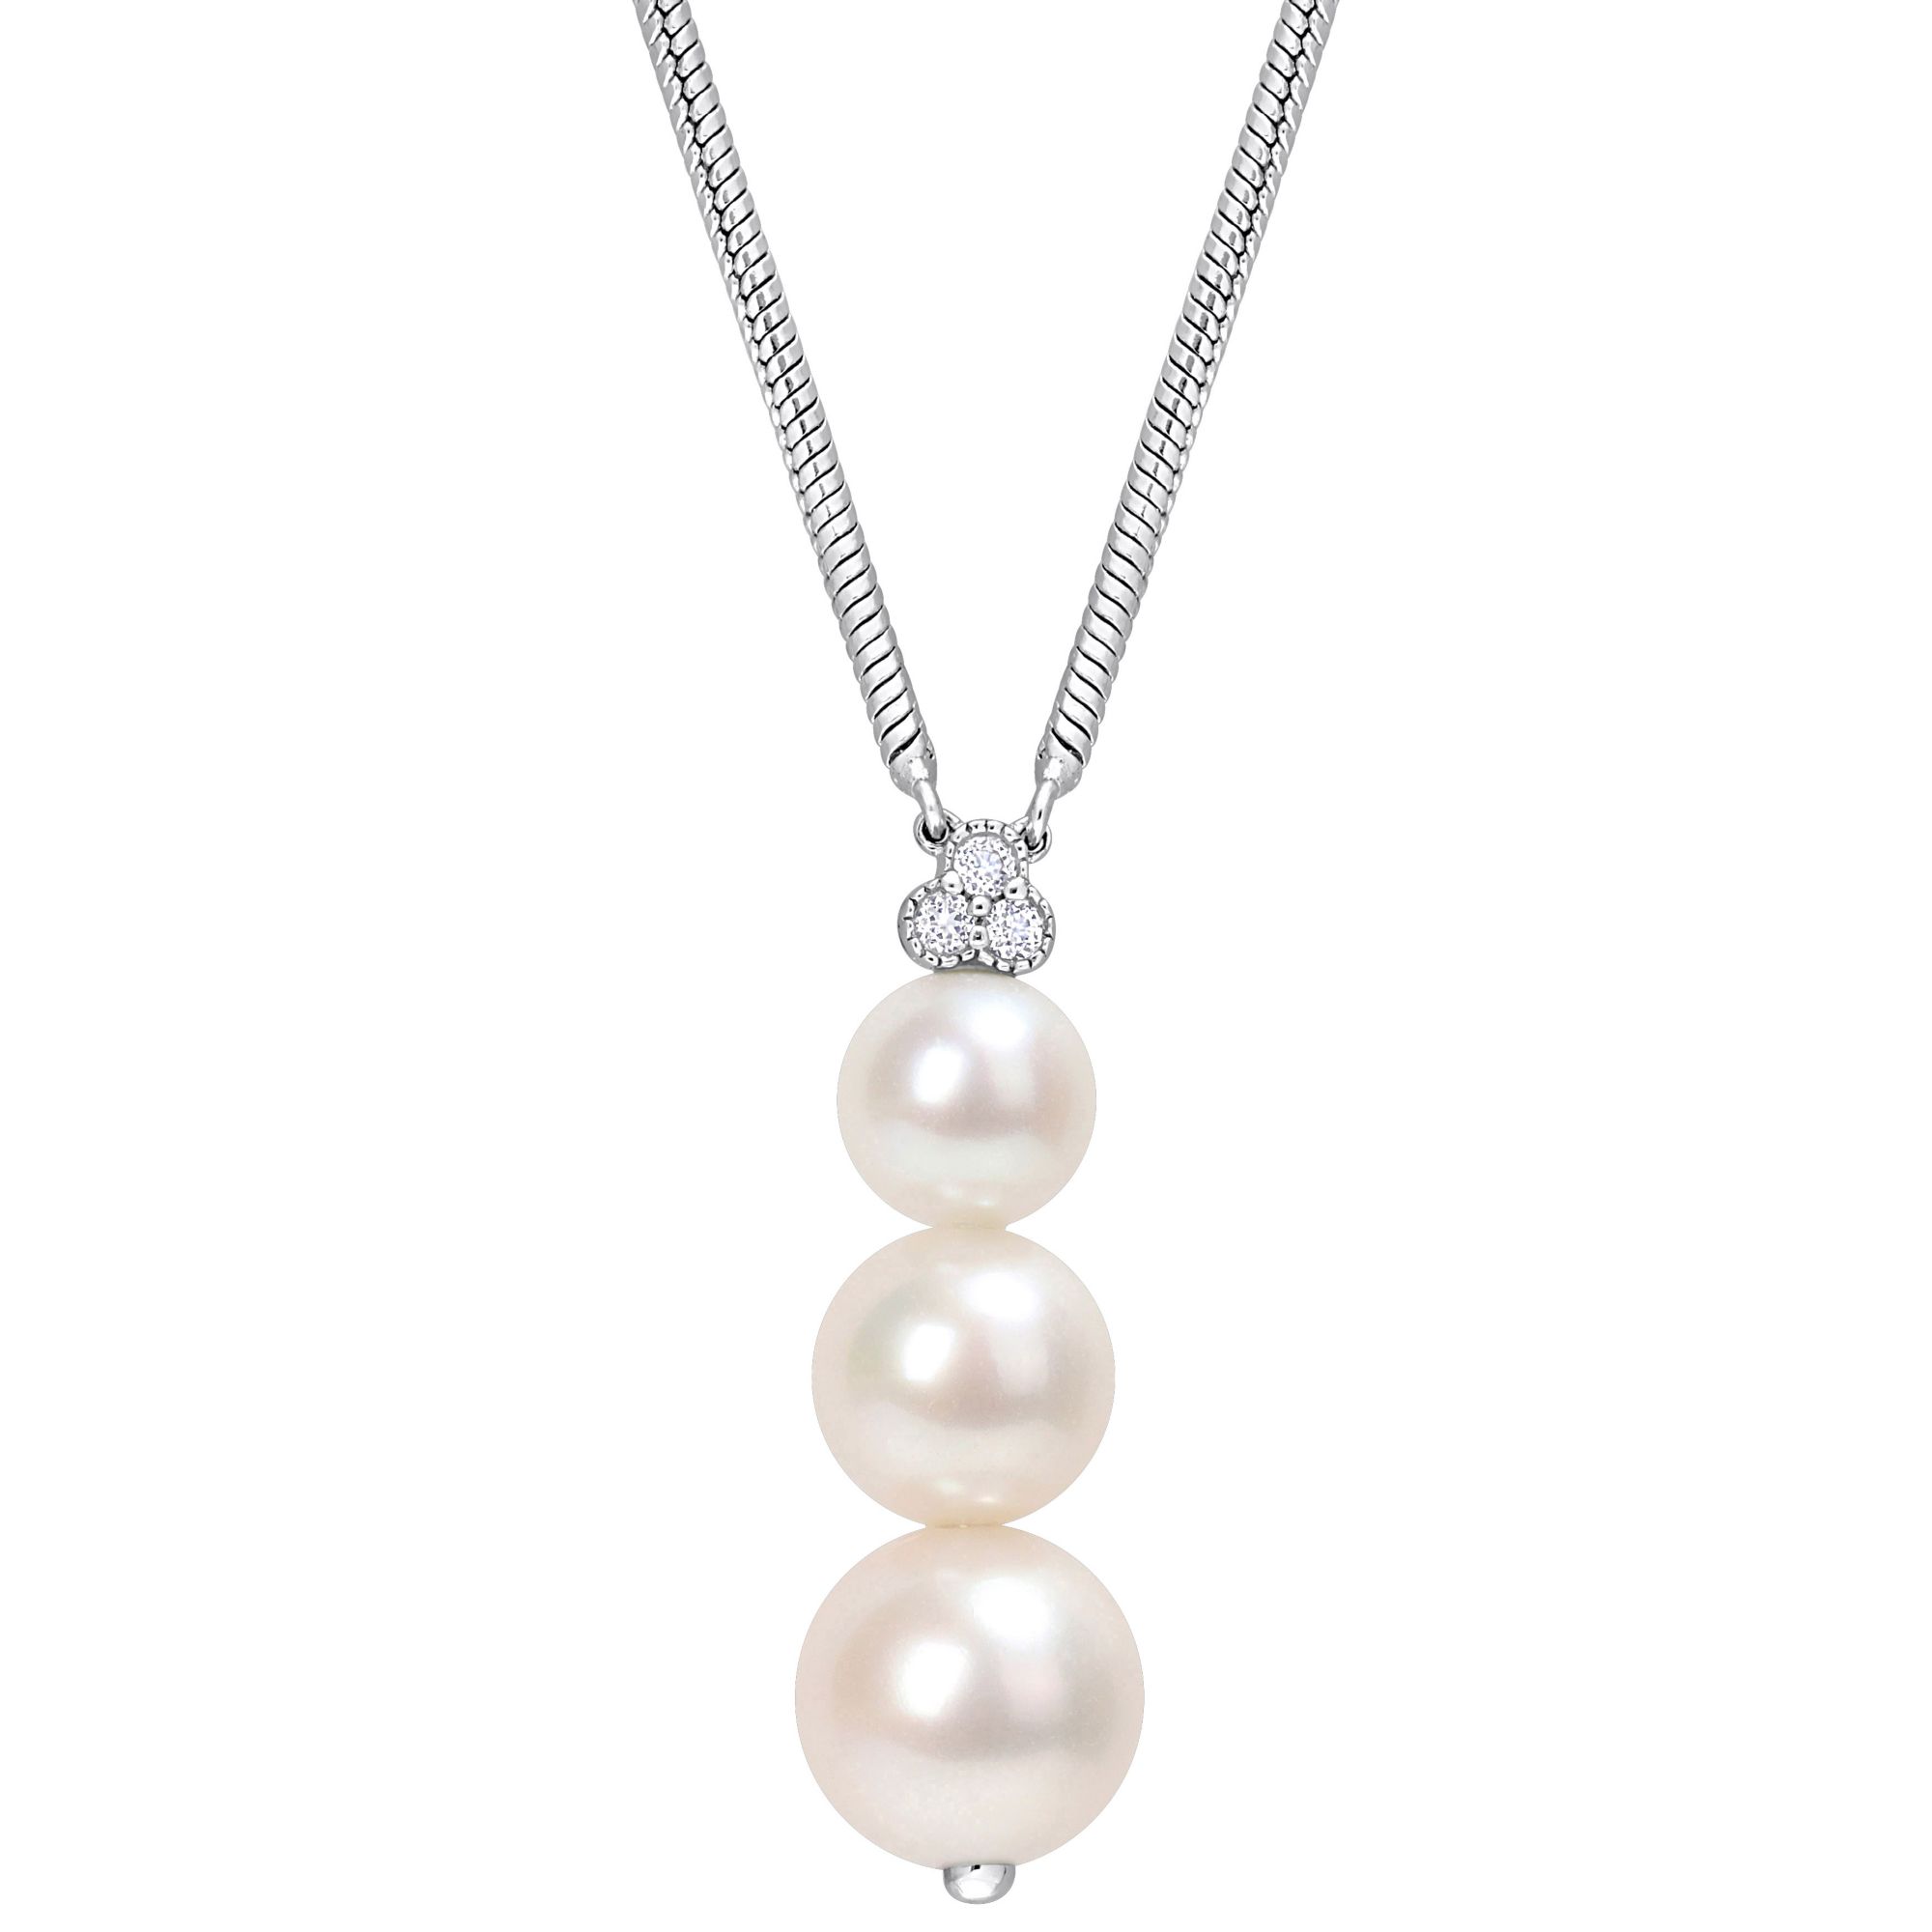 6-8.5mm Cultured Freshwater Pearl and 0.1 ct. t.g.w. White Topaz Drop Necklace in Sterling Silver